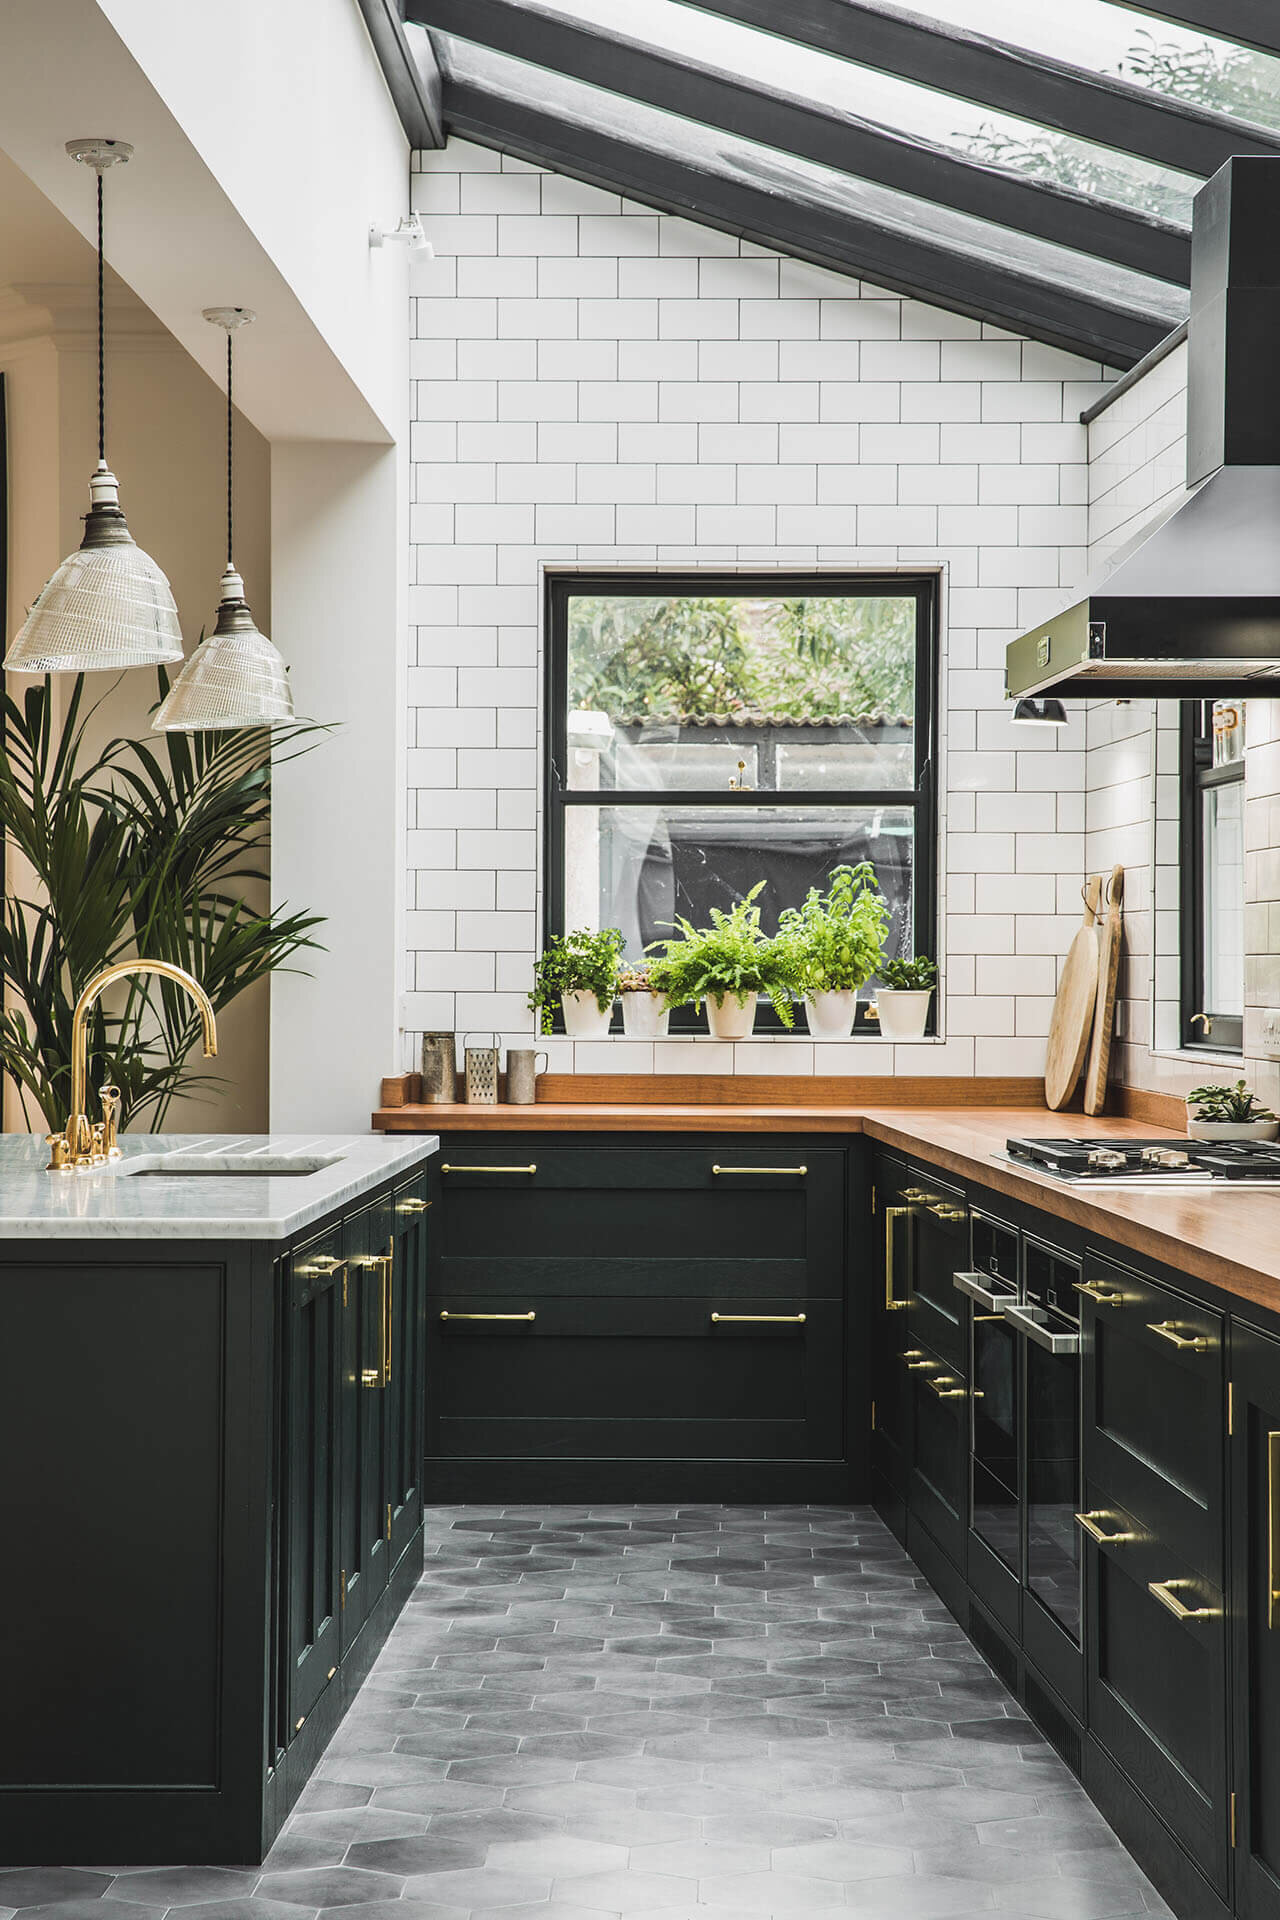 11 fads vs timeless design styles - Nadine Stay | How to identify if a design element is trendy or a classic. Interior design styles that are trends and design styles that are timeless. | Image via Sustainable Kitchens